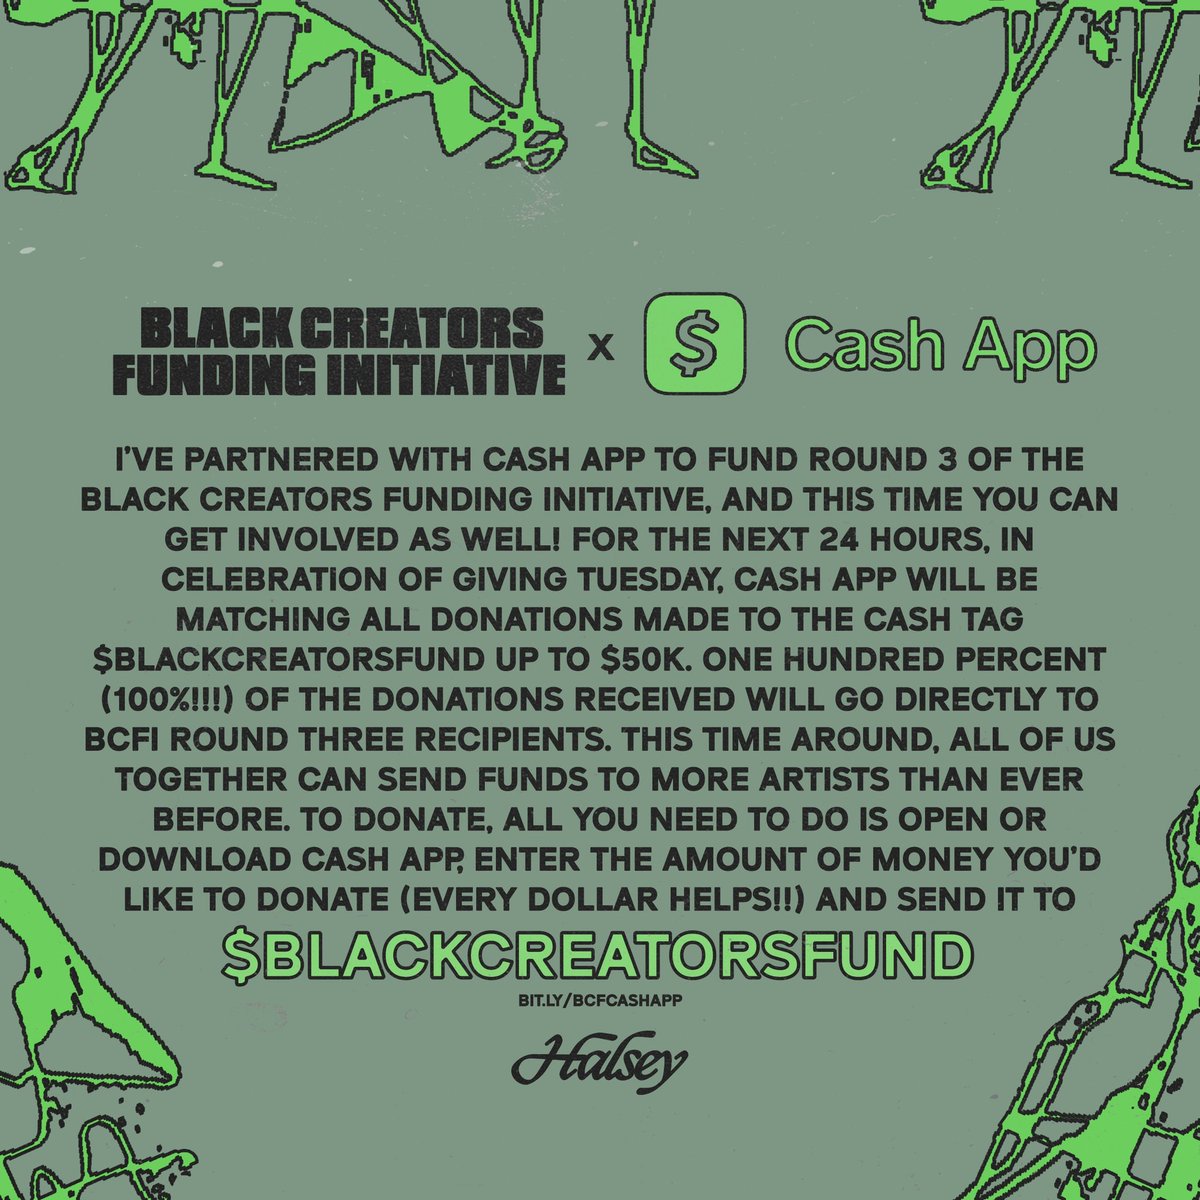 So excited to announce round 3 of the #BlackCreatorsFund with @CashApp! download the app to donate 🤍 bit.ly/BCFCashApp #partner